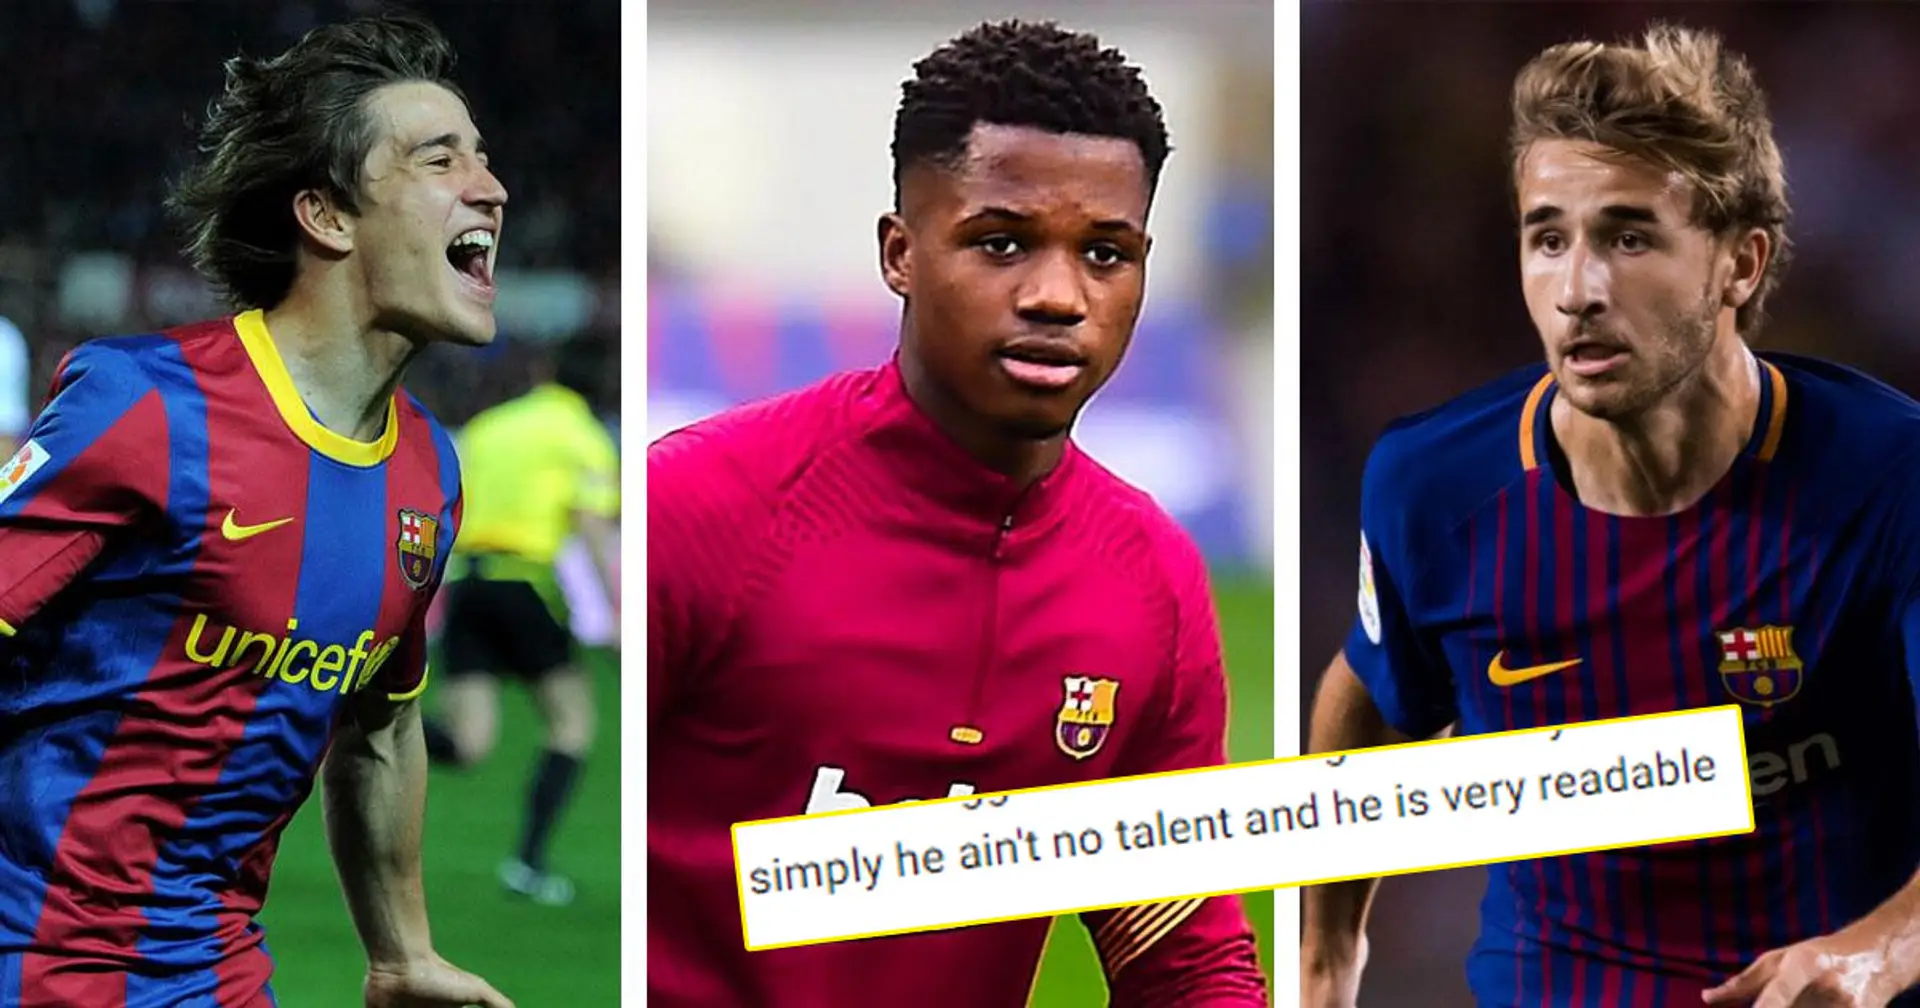 'He ain't no talent': Fan predicts Fati will flop in long-term —  5 La Masia players that failed on big stage